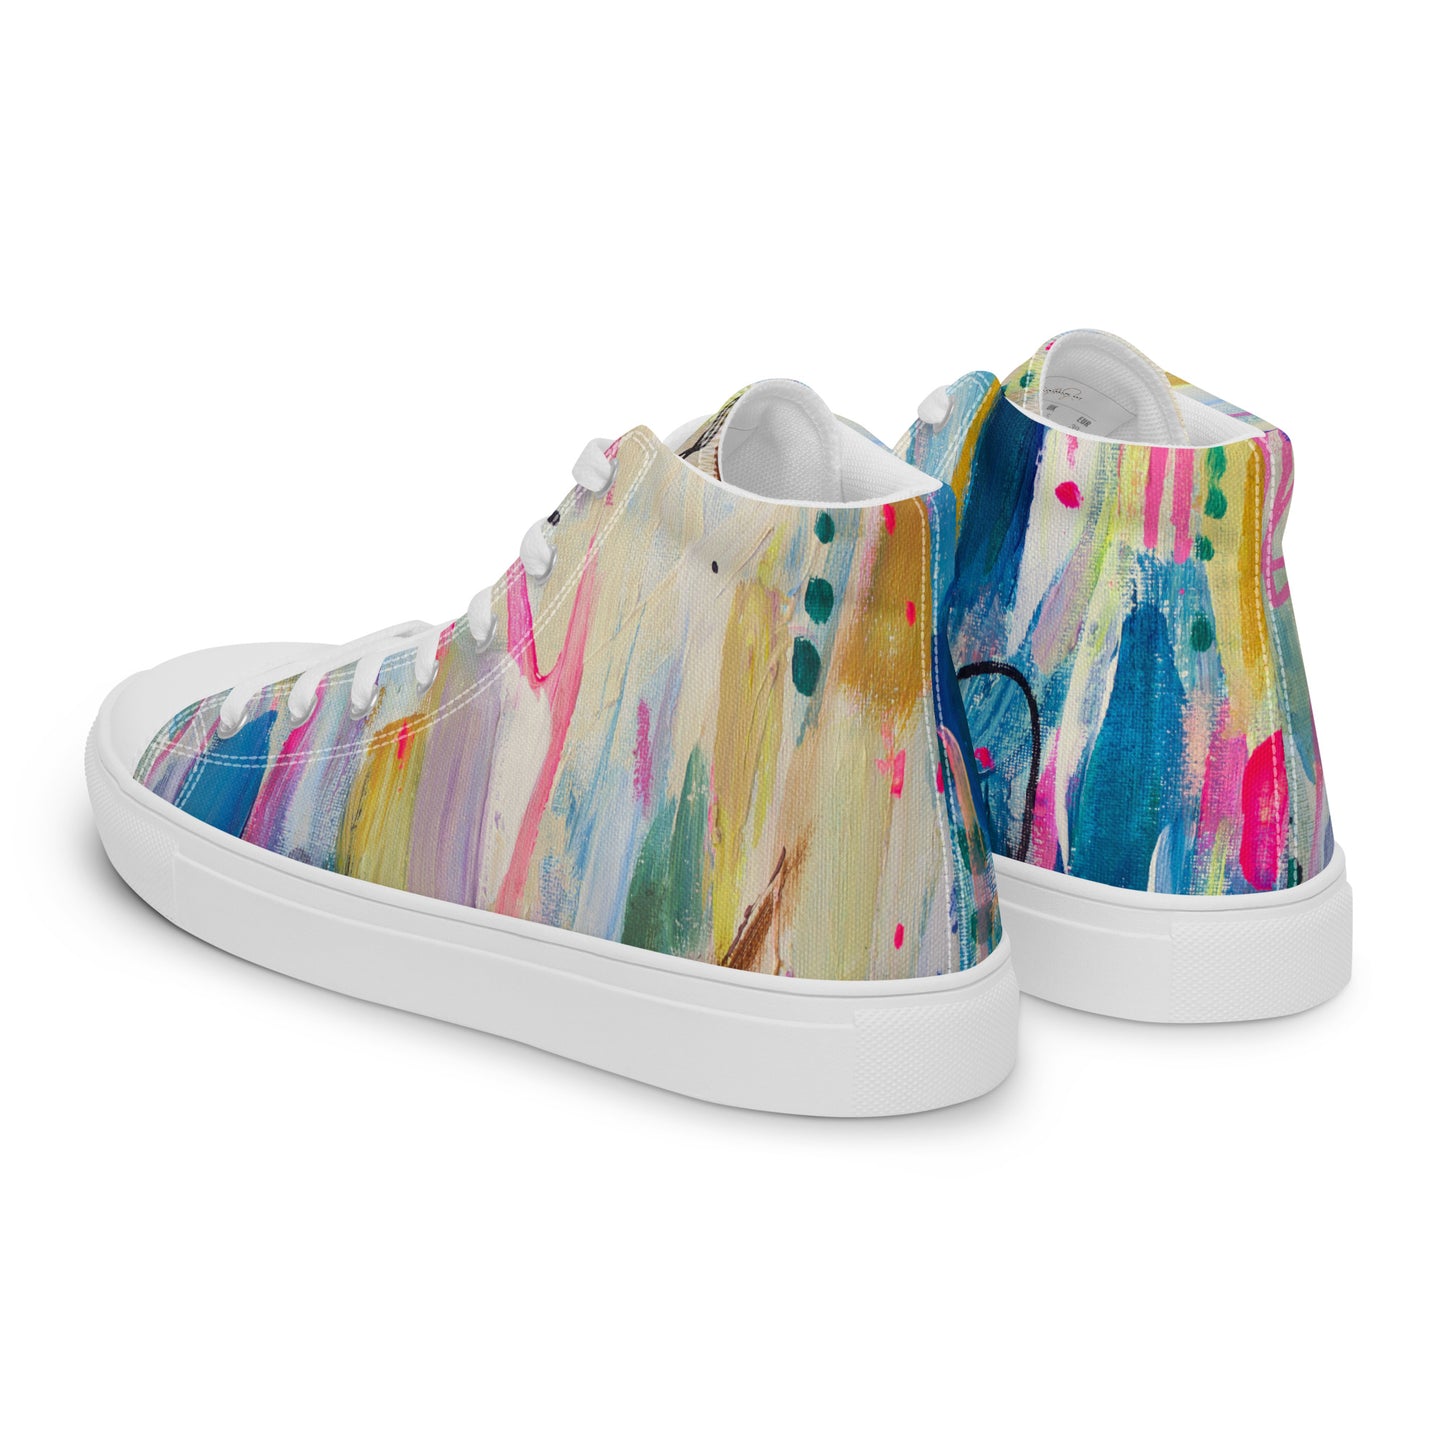 Sky Melt by Sara Franklin | Women’s high top canvas shoes